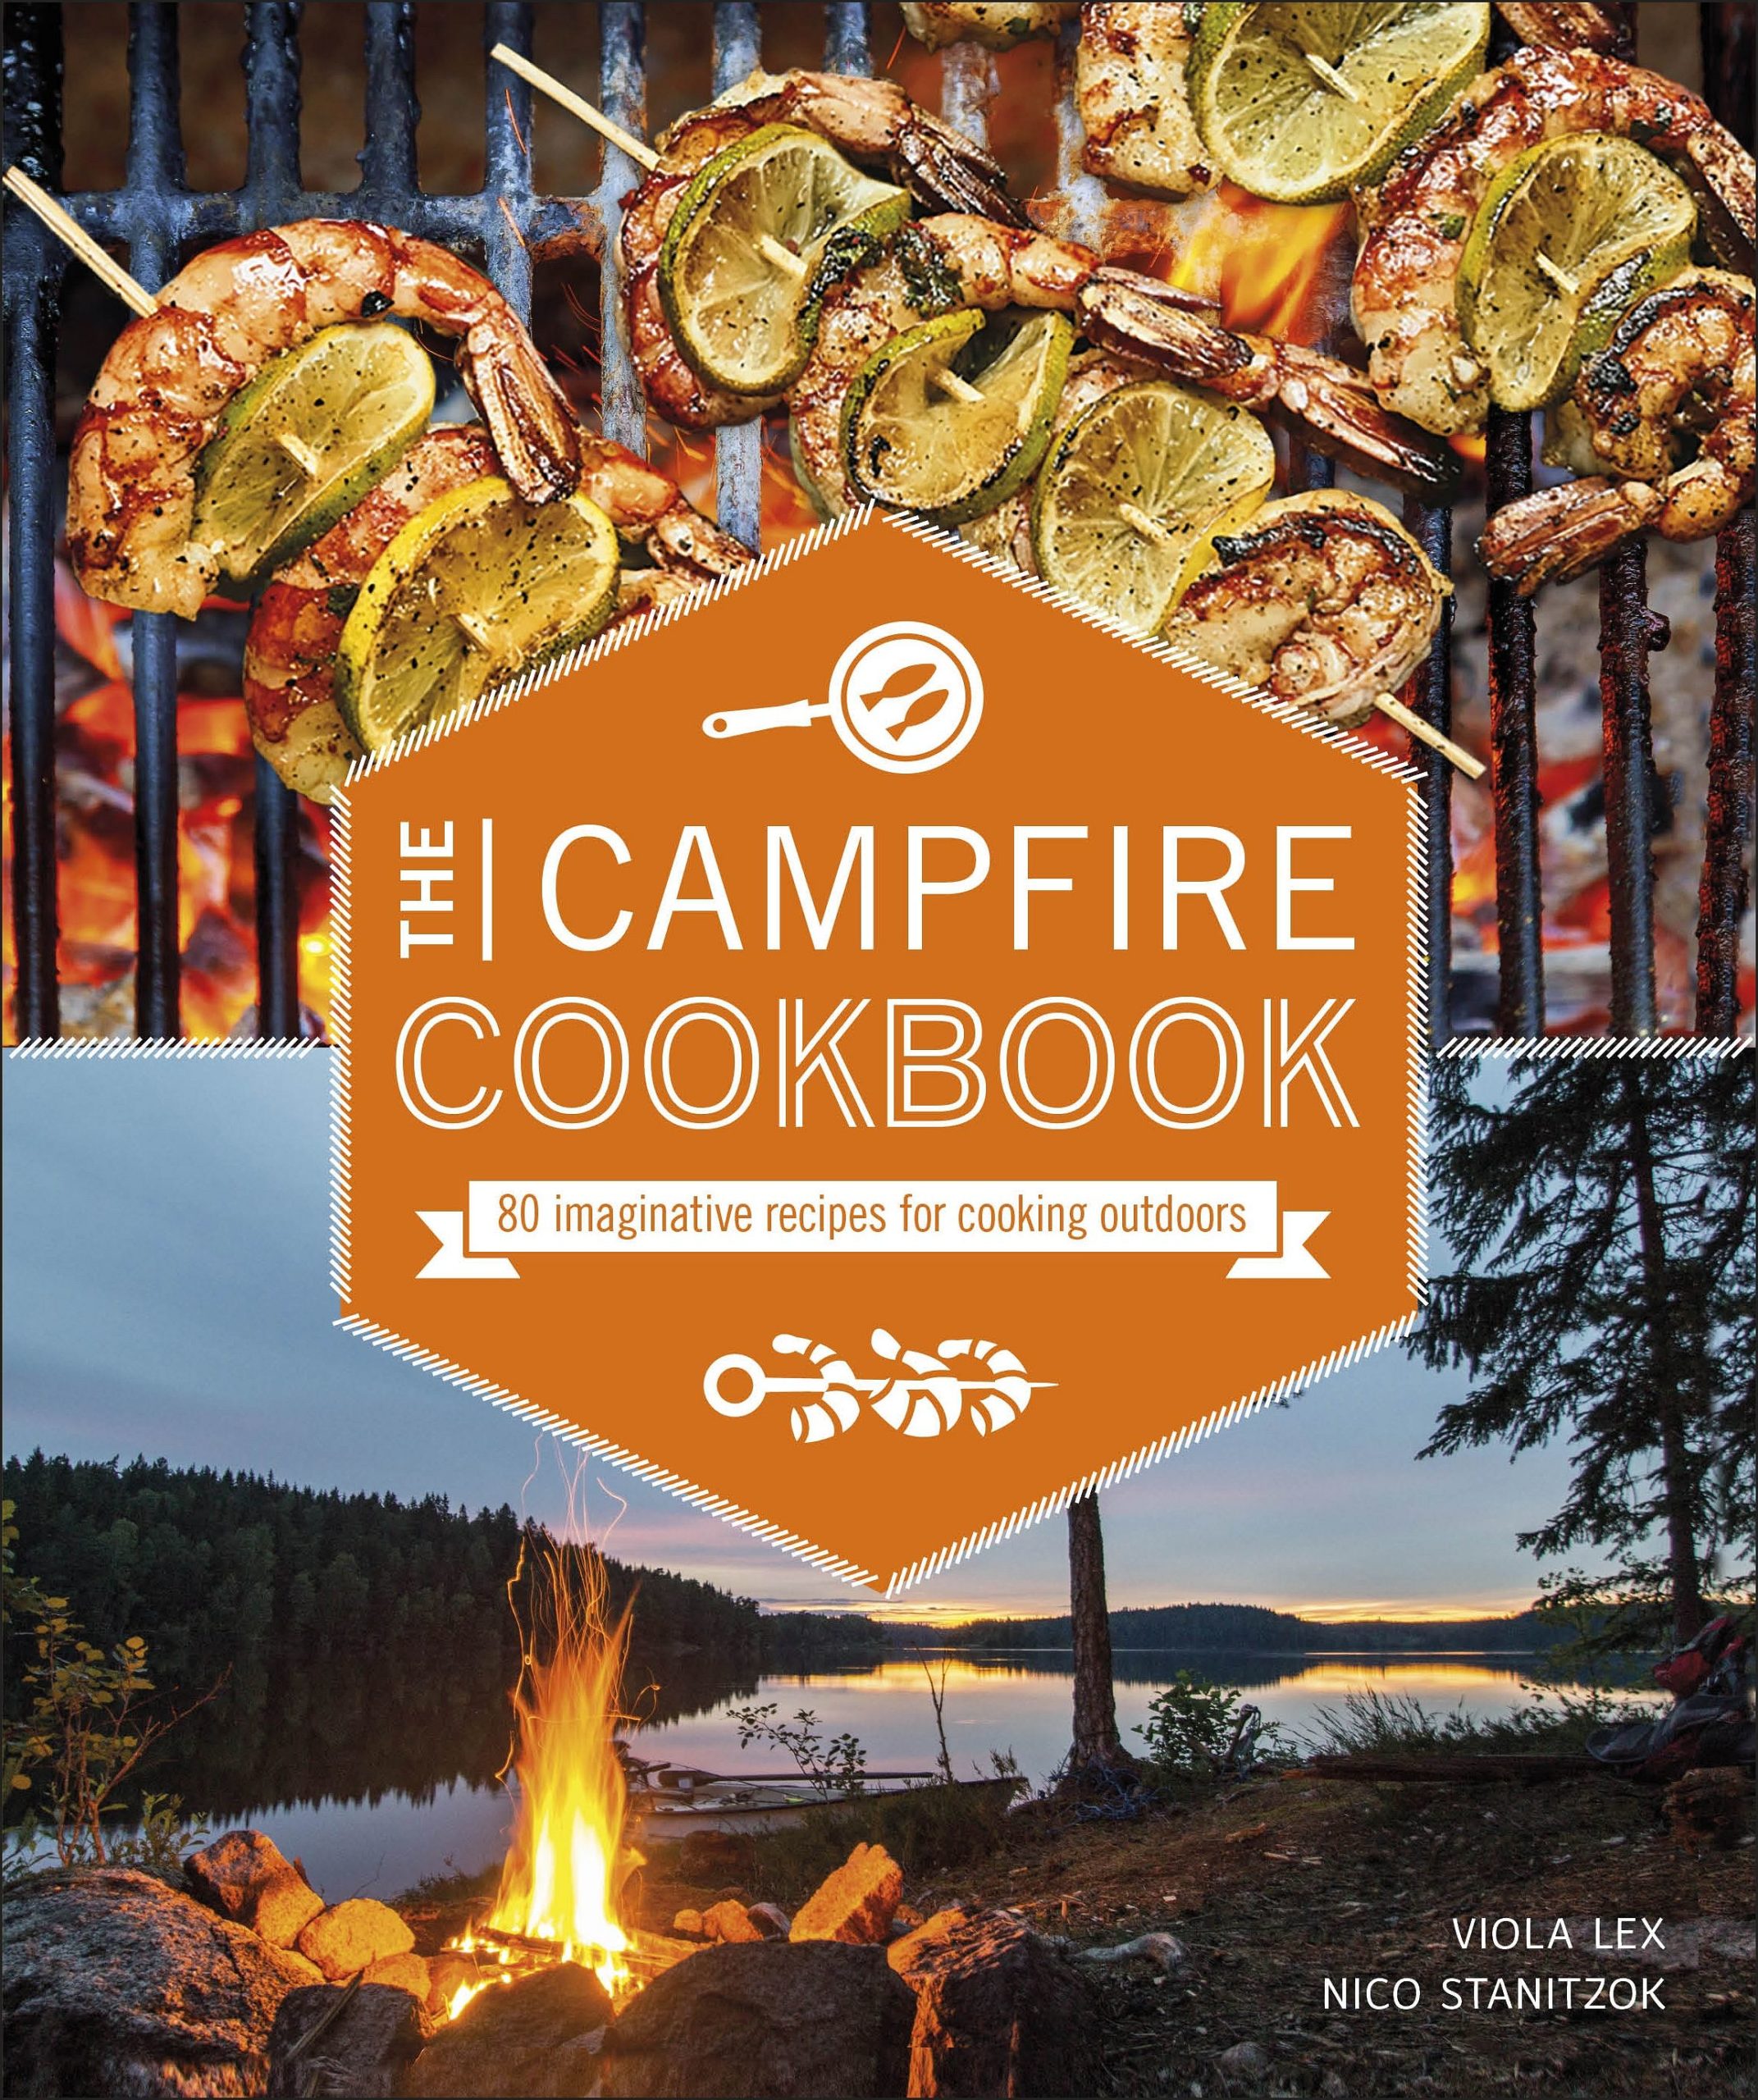 The Campfire Cookbook: 80 Imaginative Recipes for Cooking Outdoors